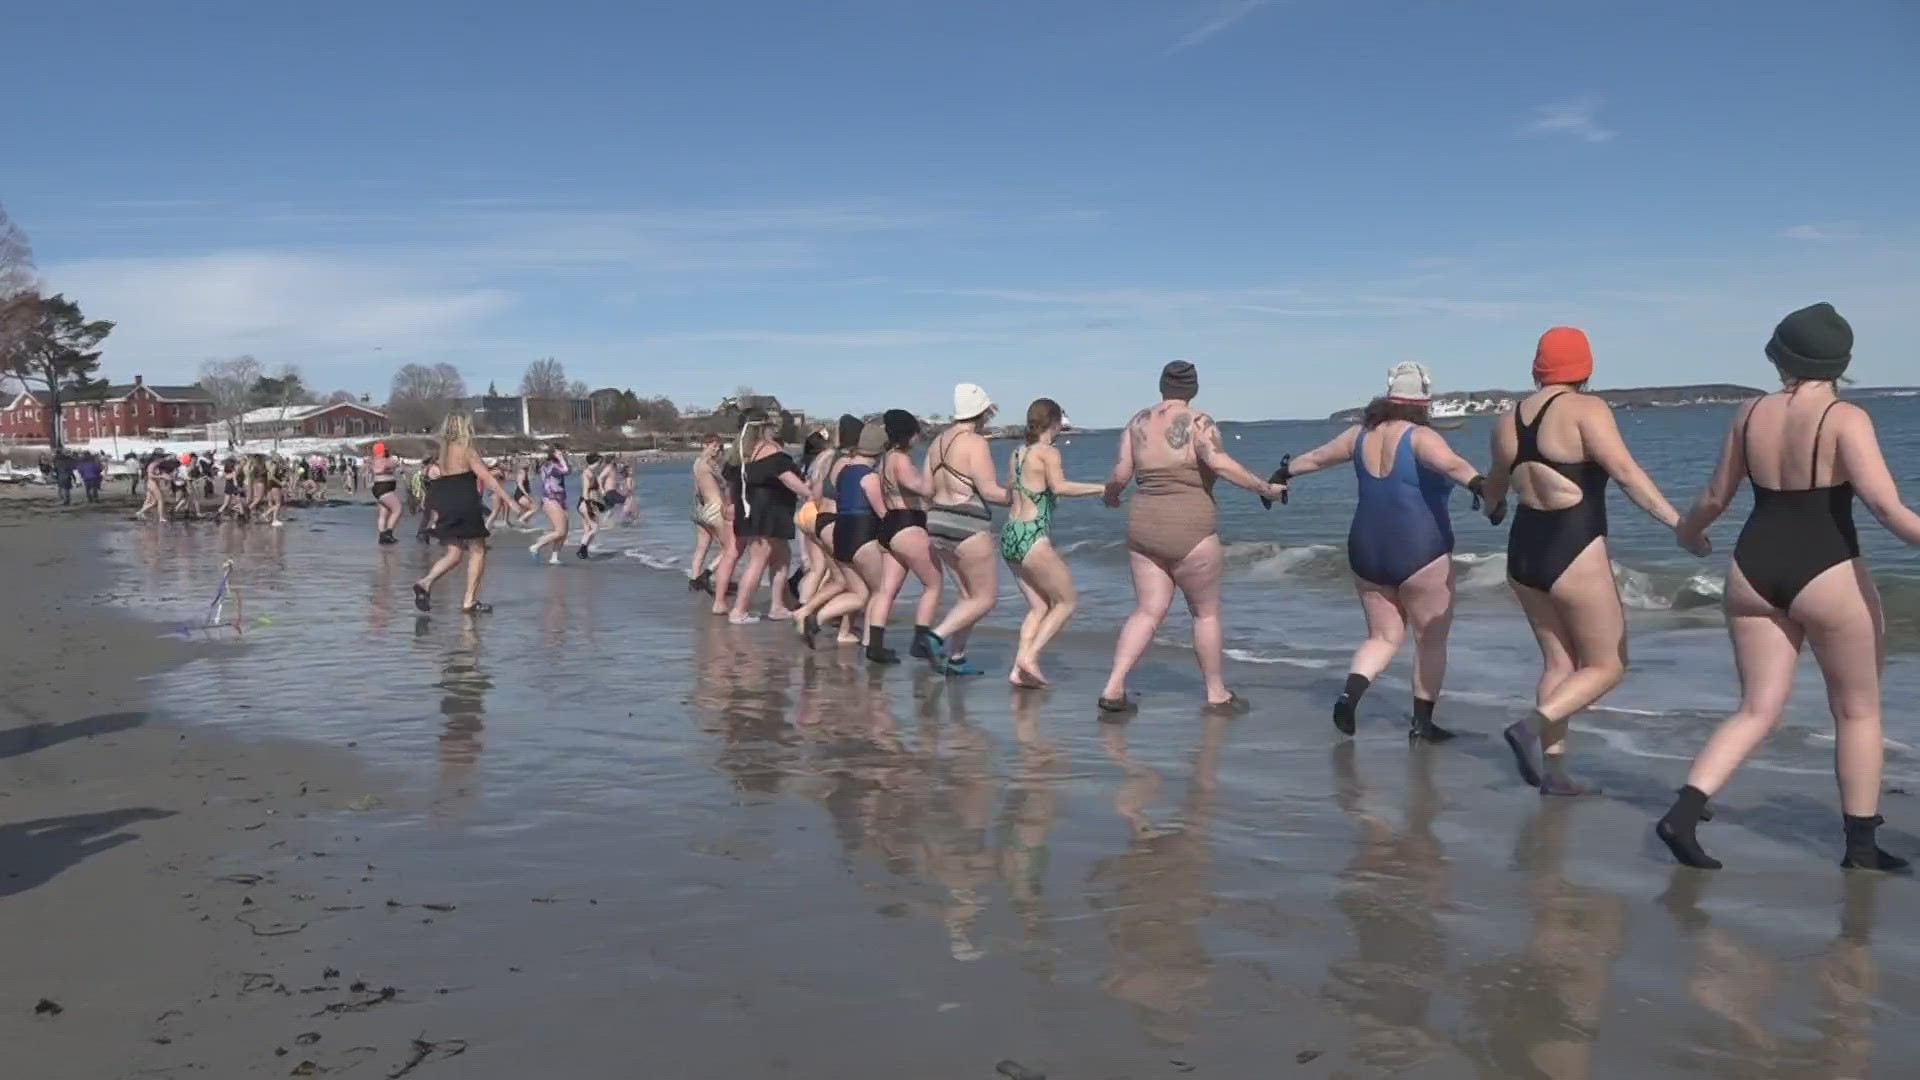 On Sunday, more than 200 women participated in a cold water dip at Willard Beach in South Portland.